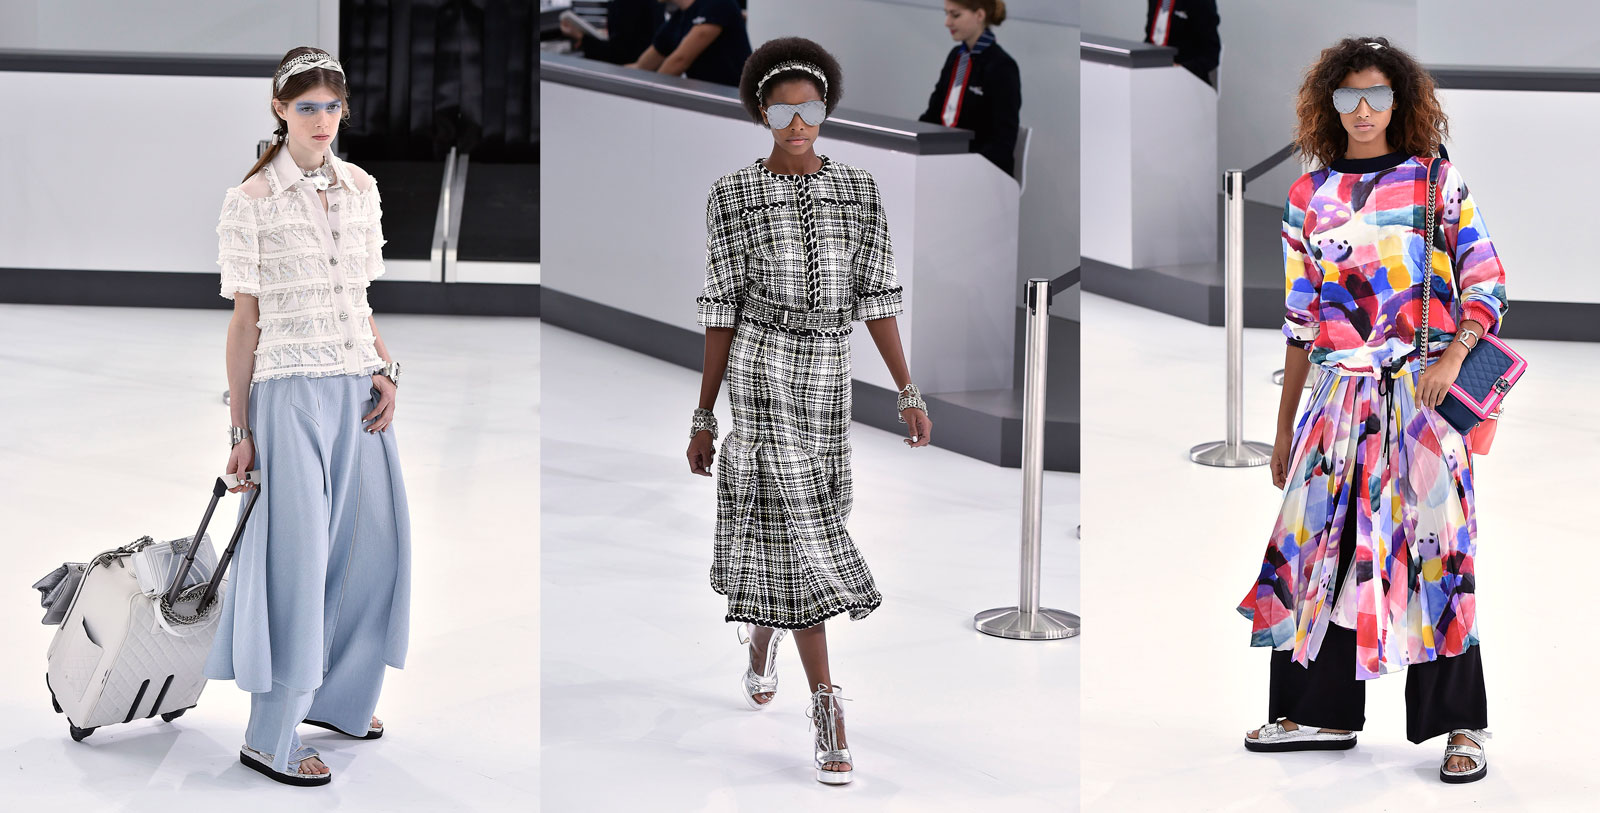 Chanel takes the runway to the airport for Paris Fashion Week